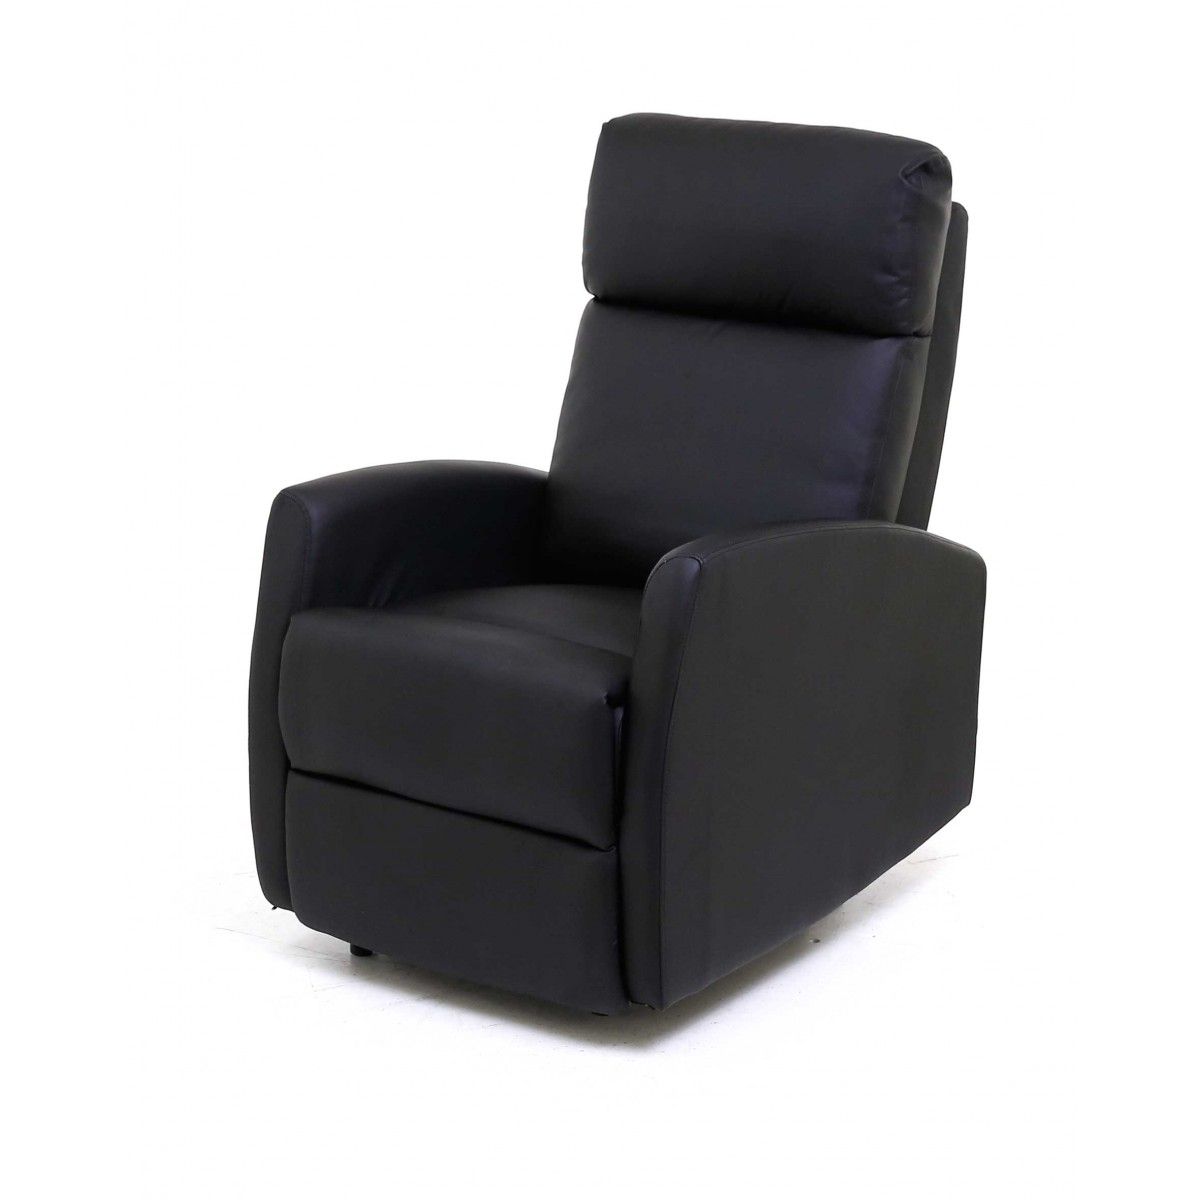 Fauteuil relaxation manuel simili cuir owen Inwood